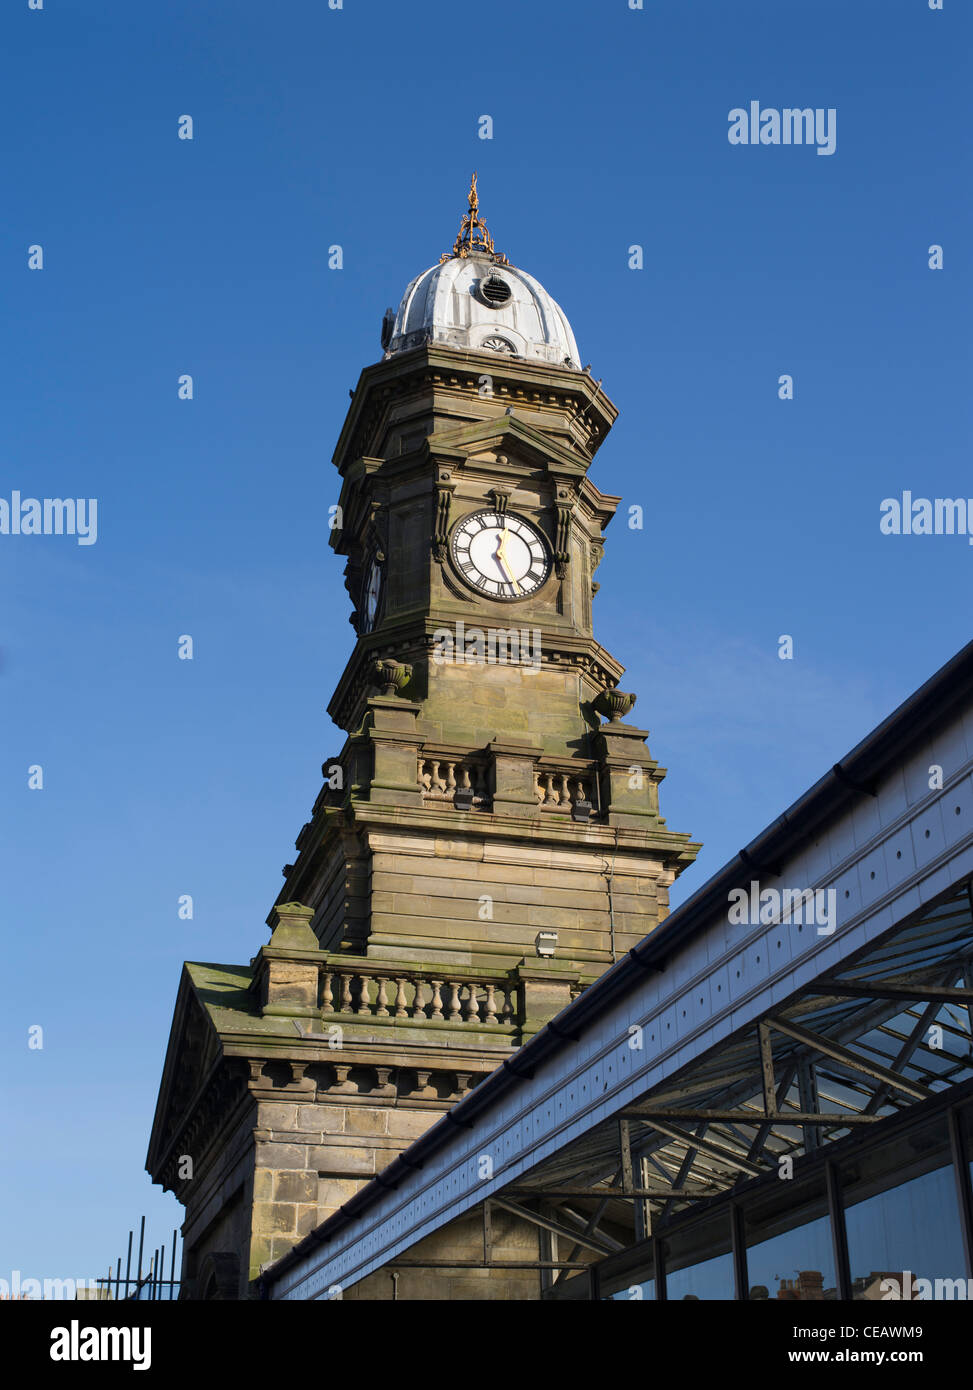 dh SCARBOROUGH NORTH YORKSHIRE Old Railway Station Clock Tower uk Stockfoto